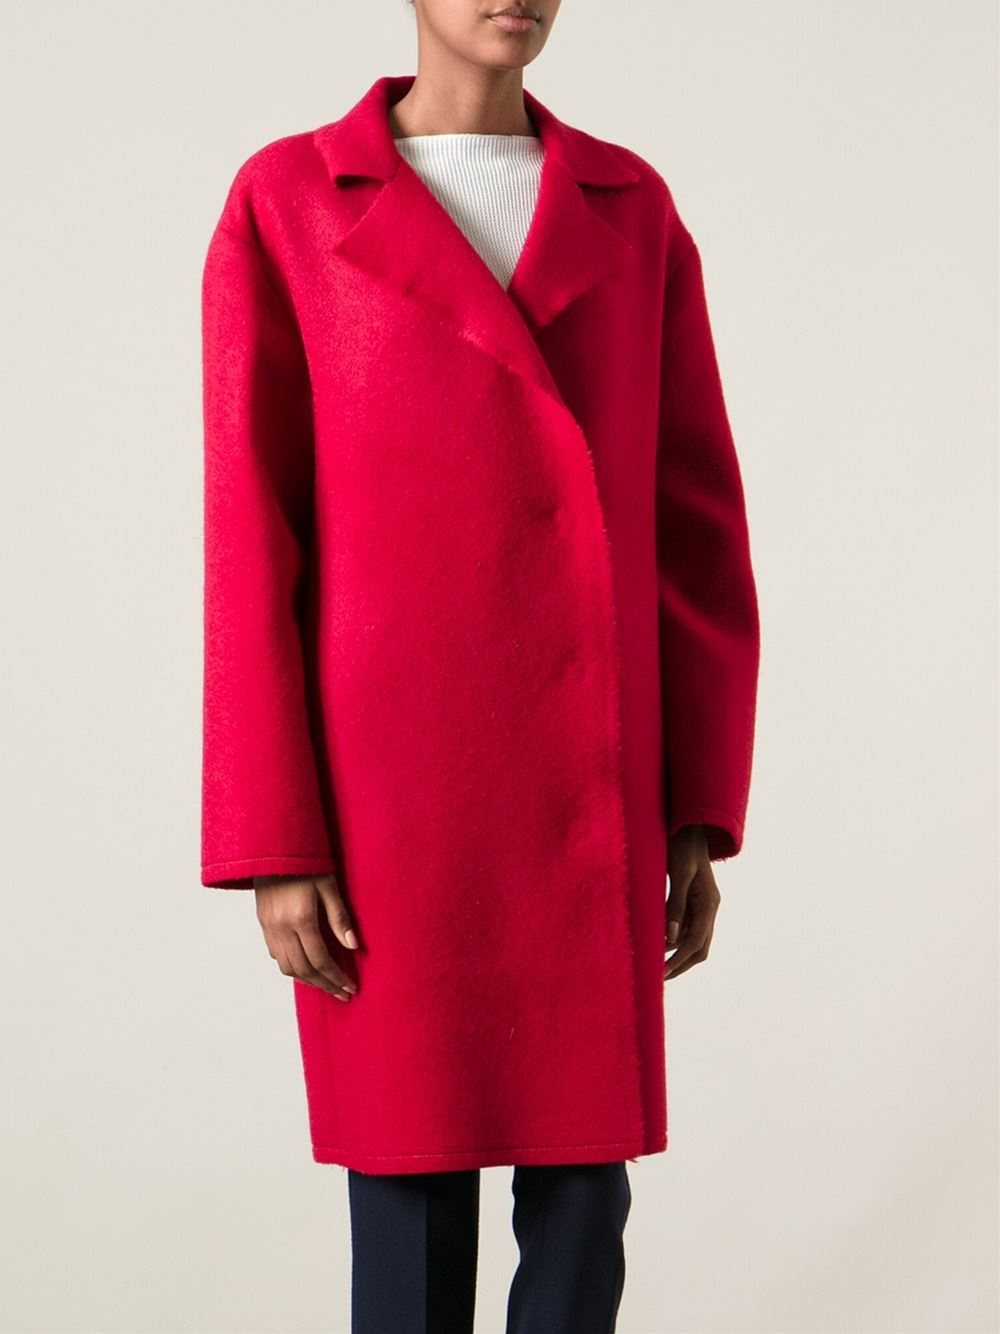 Lyst - Lanvin Single Breasted Coat in Red